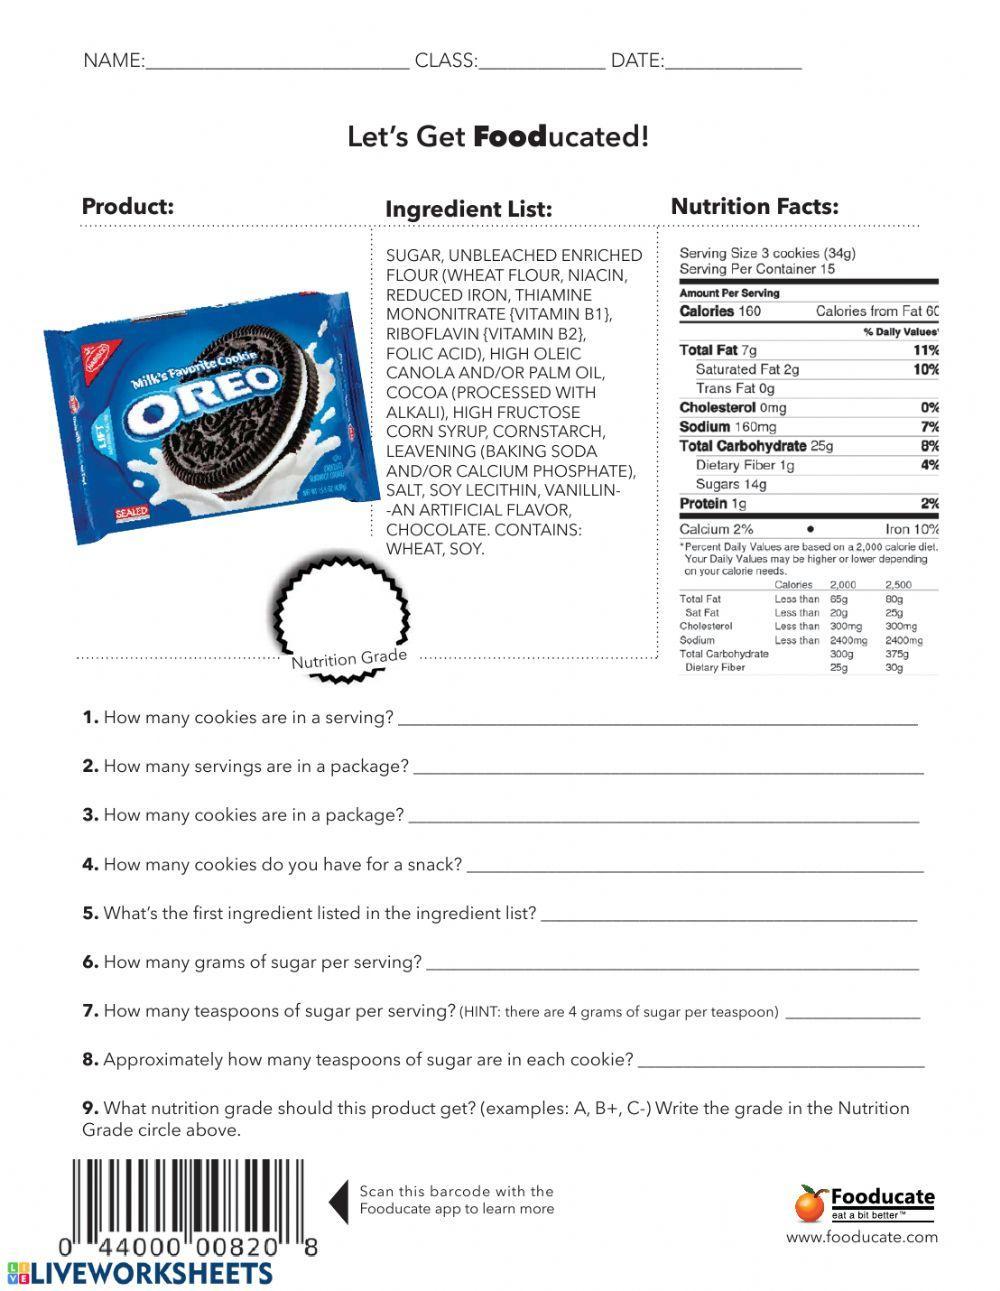 Let's Get Fooducated - Oreos